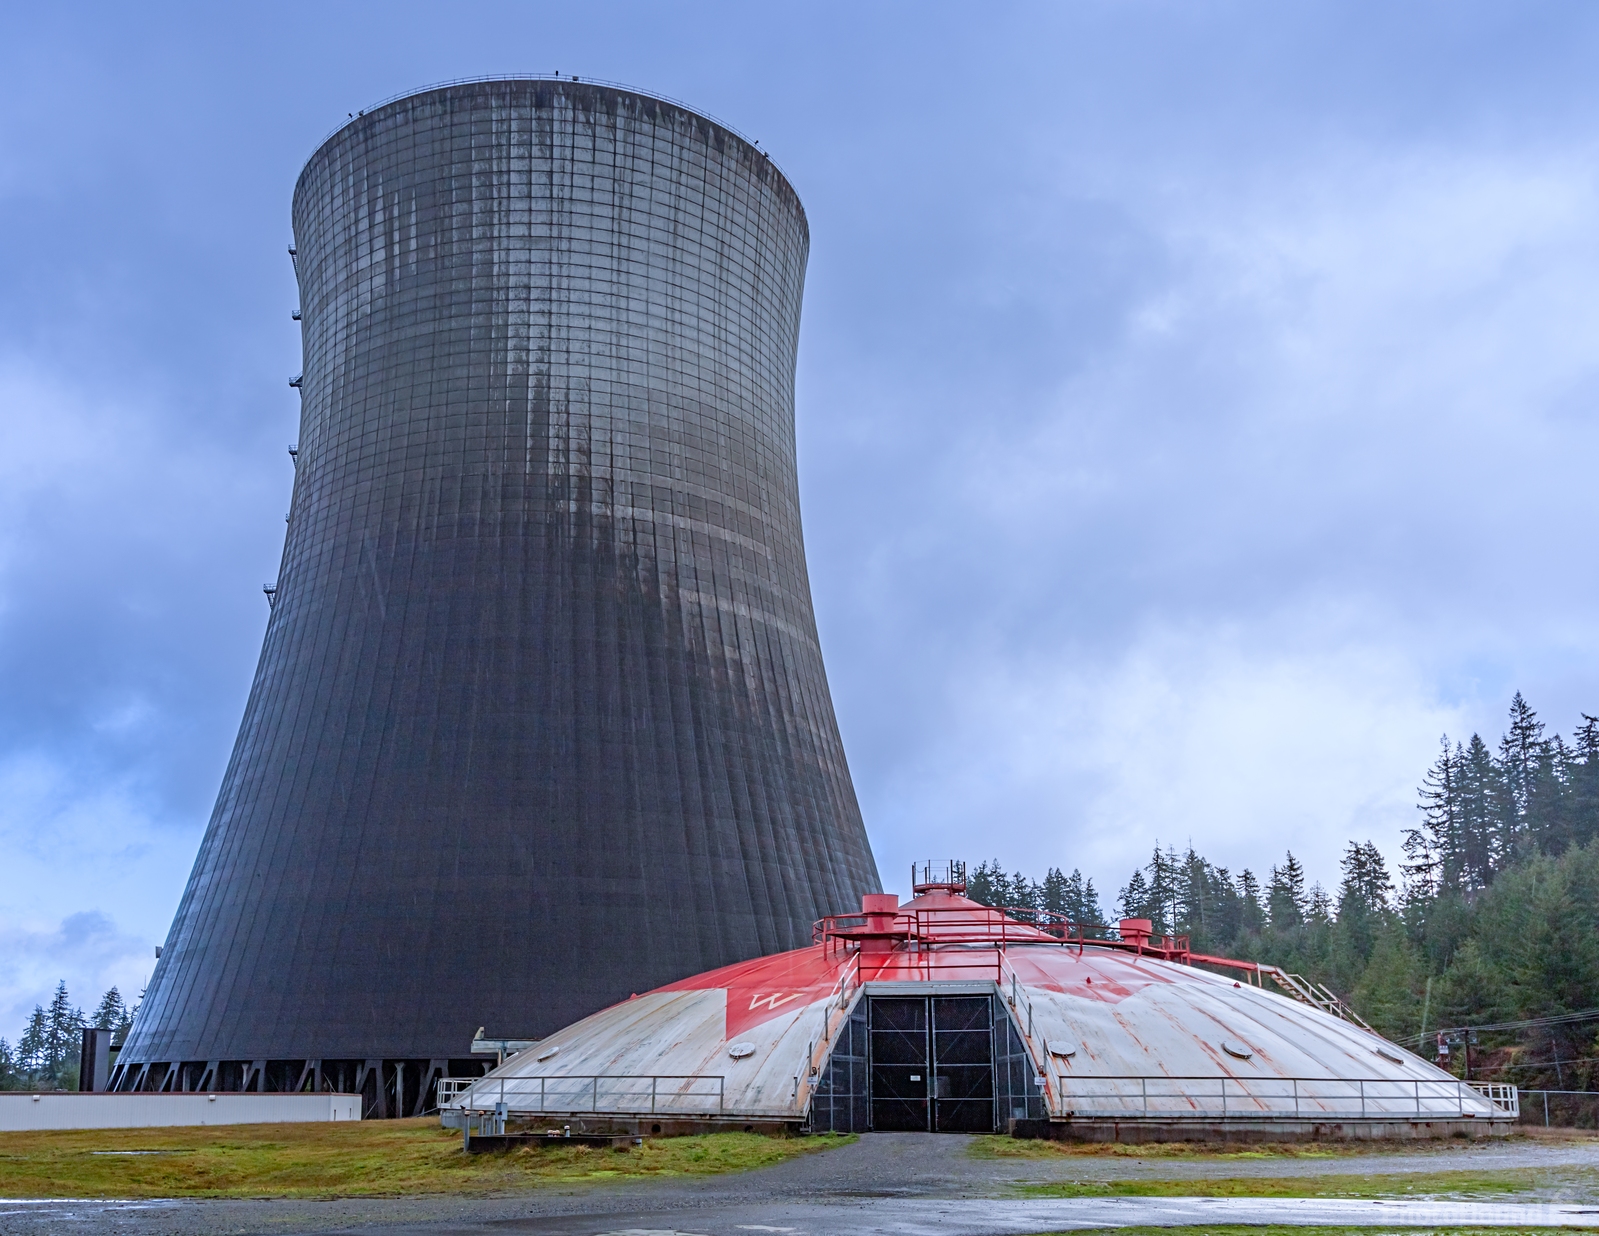 Image of Satsop Nuclear Power Plant by edward oliver